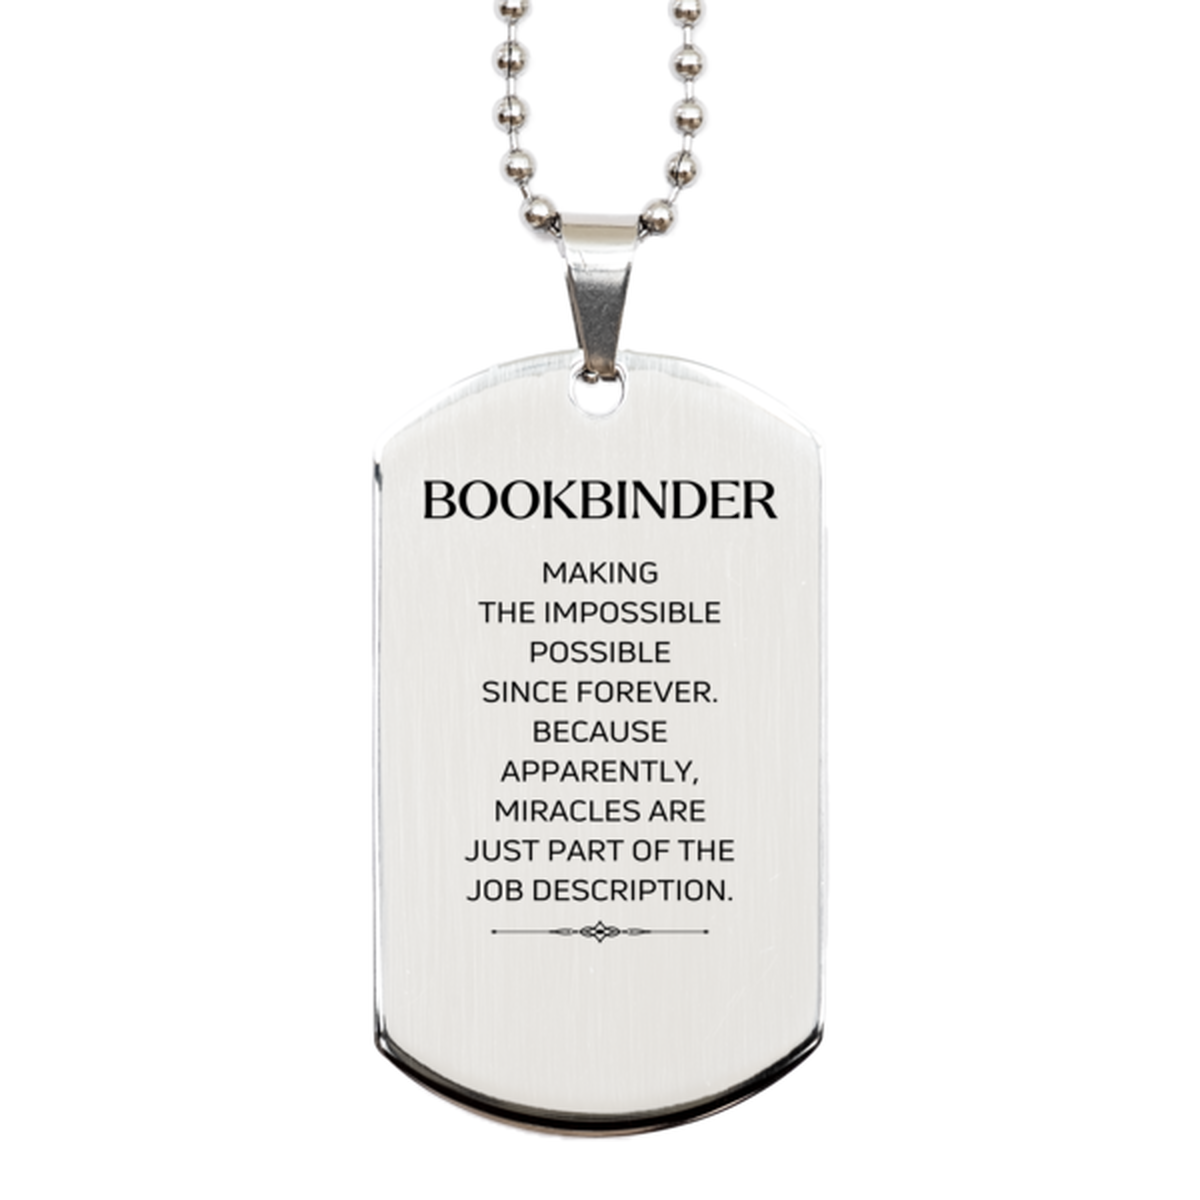 Funny Bookbinder Gifts, Miracles are just part of the job description, Inspirational Birthday Silver Dog Tag For Bookbinder, Men, Women, Coworkers, Friends, Boss